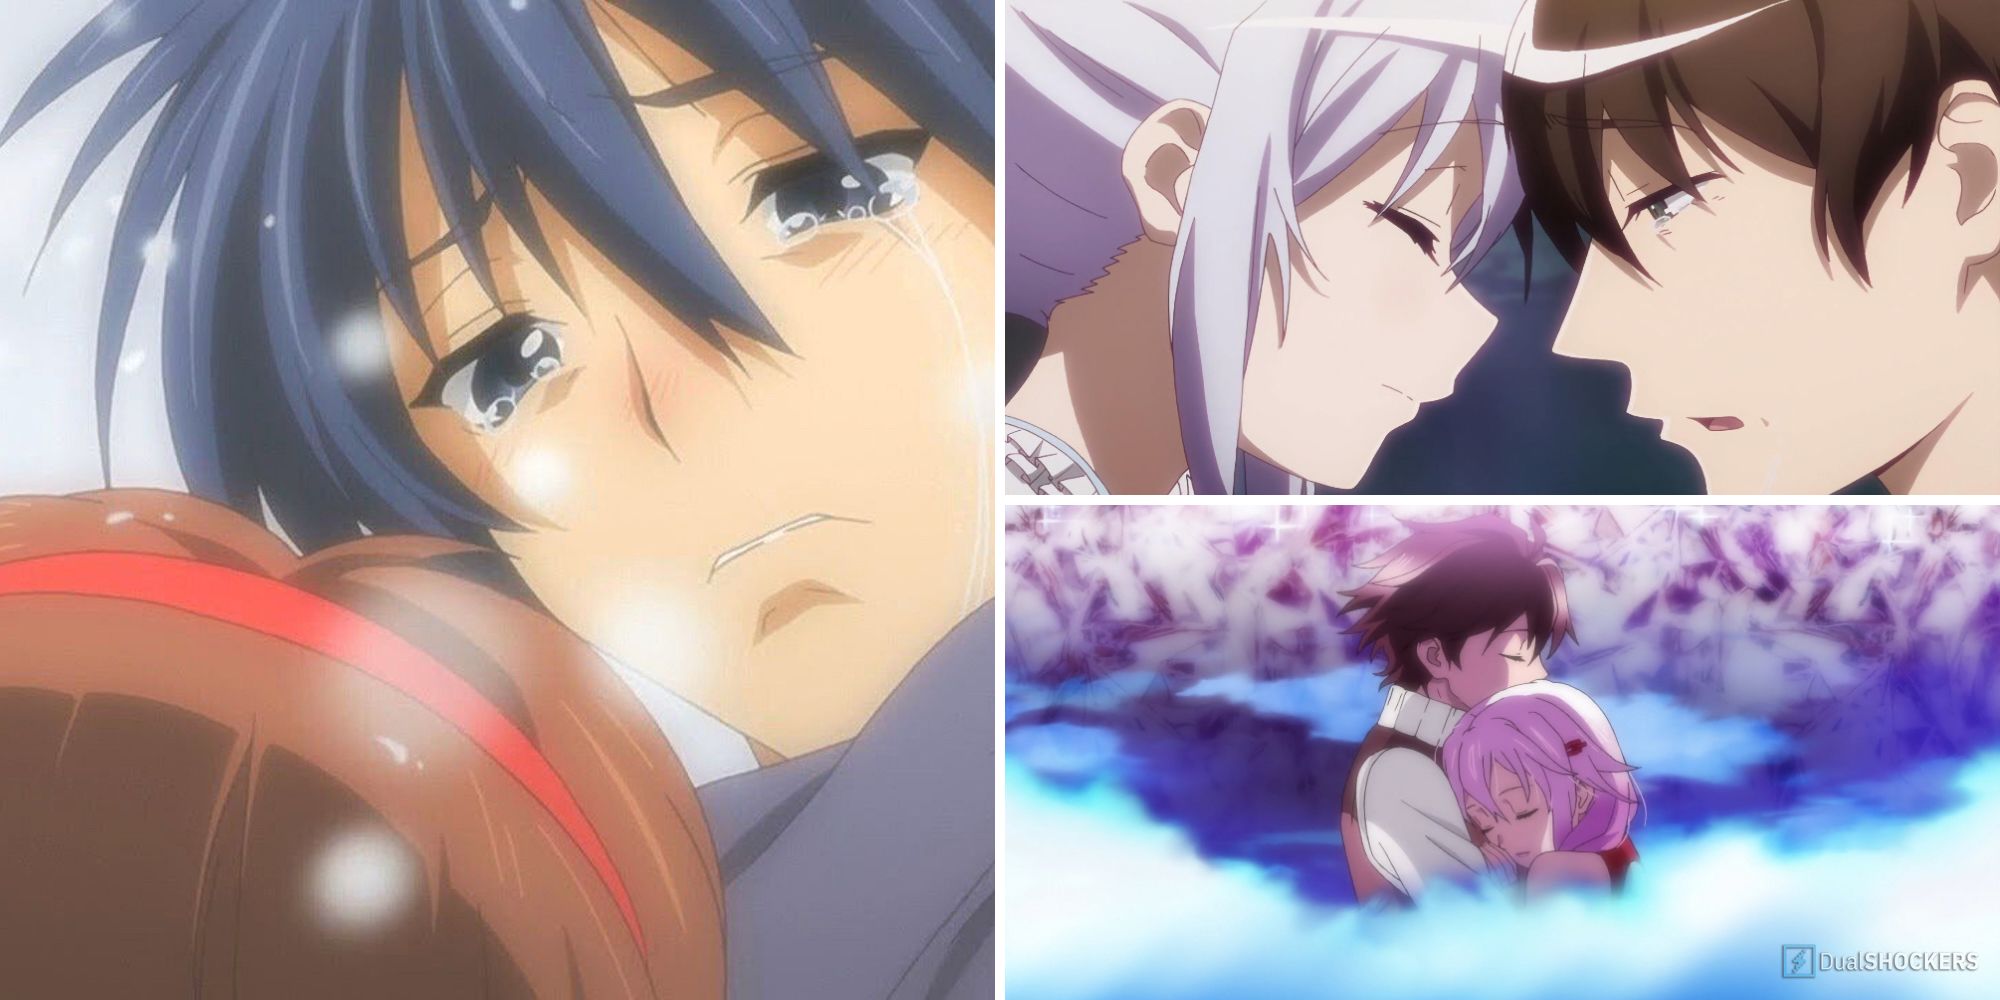 Stream Clannad: After Story on HIDIVE